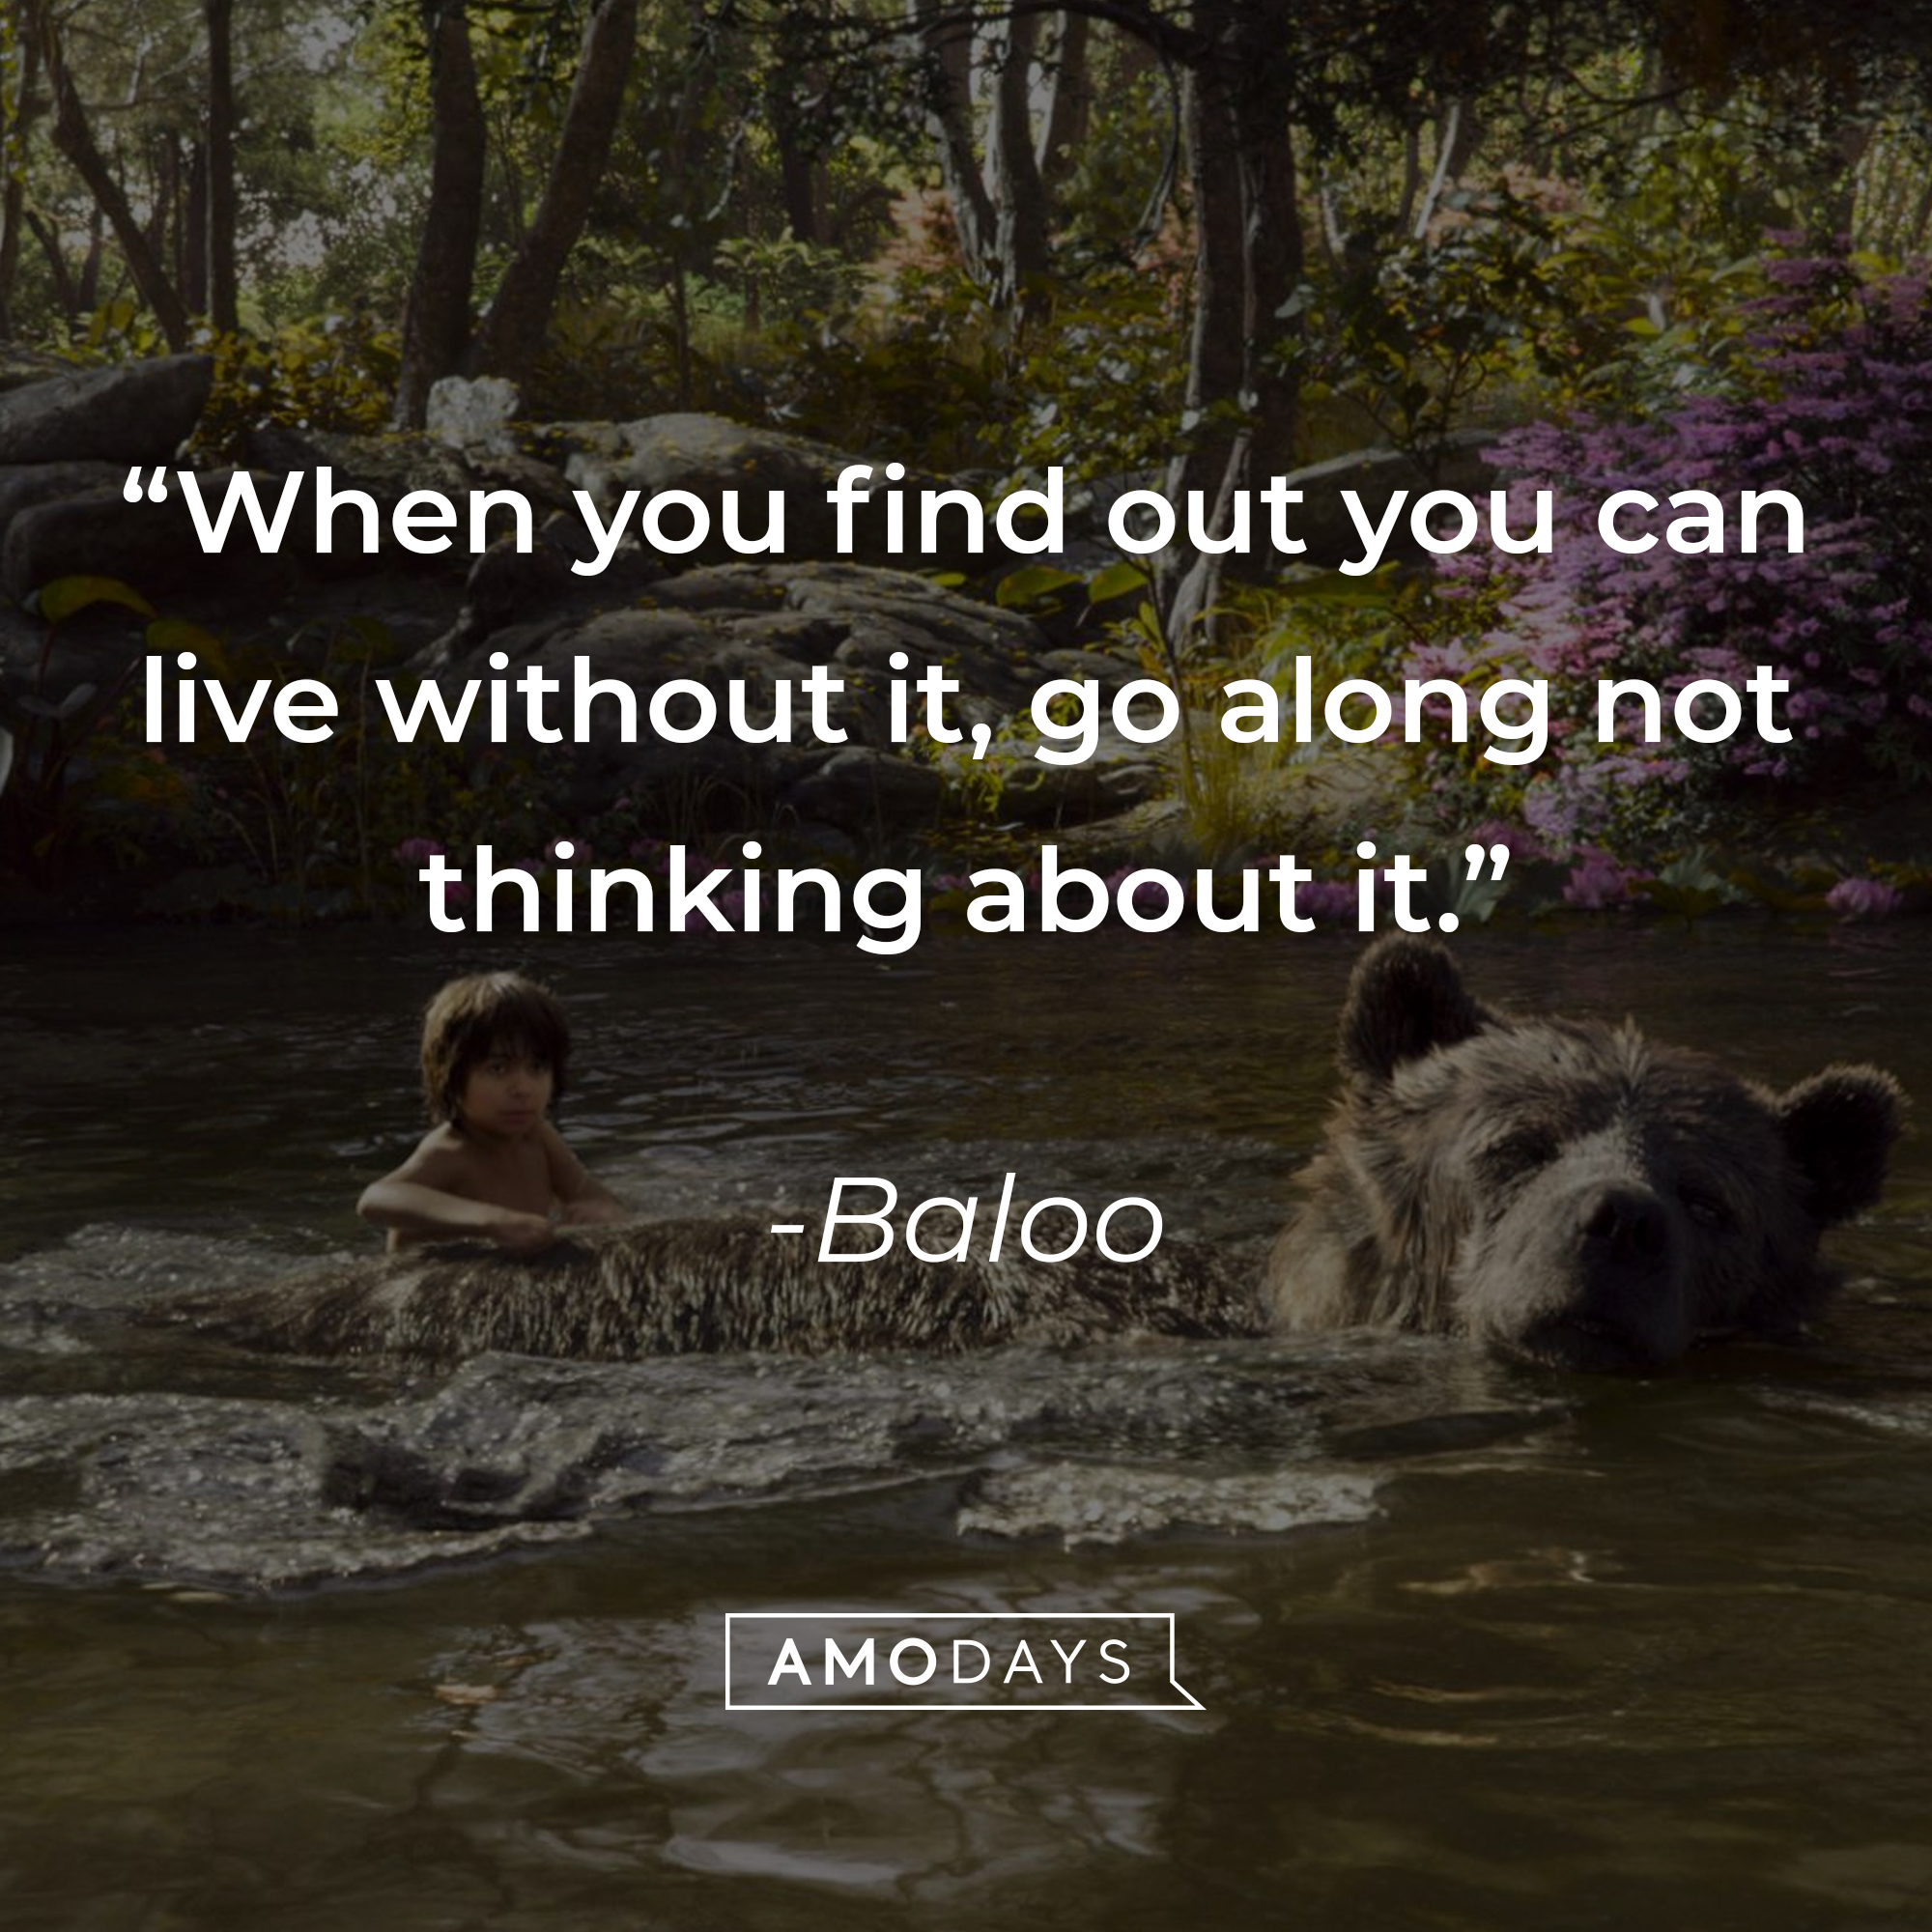 Baloo's quote: "When you find out you can live without it, go along not thinking about it." | Source: facebook.com/DisneyJungleBook